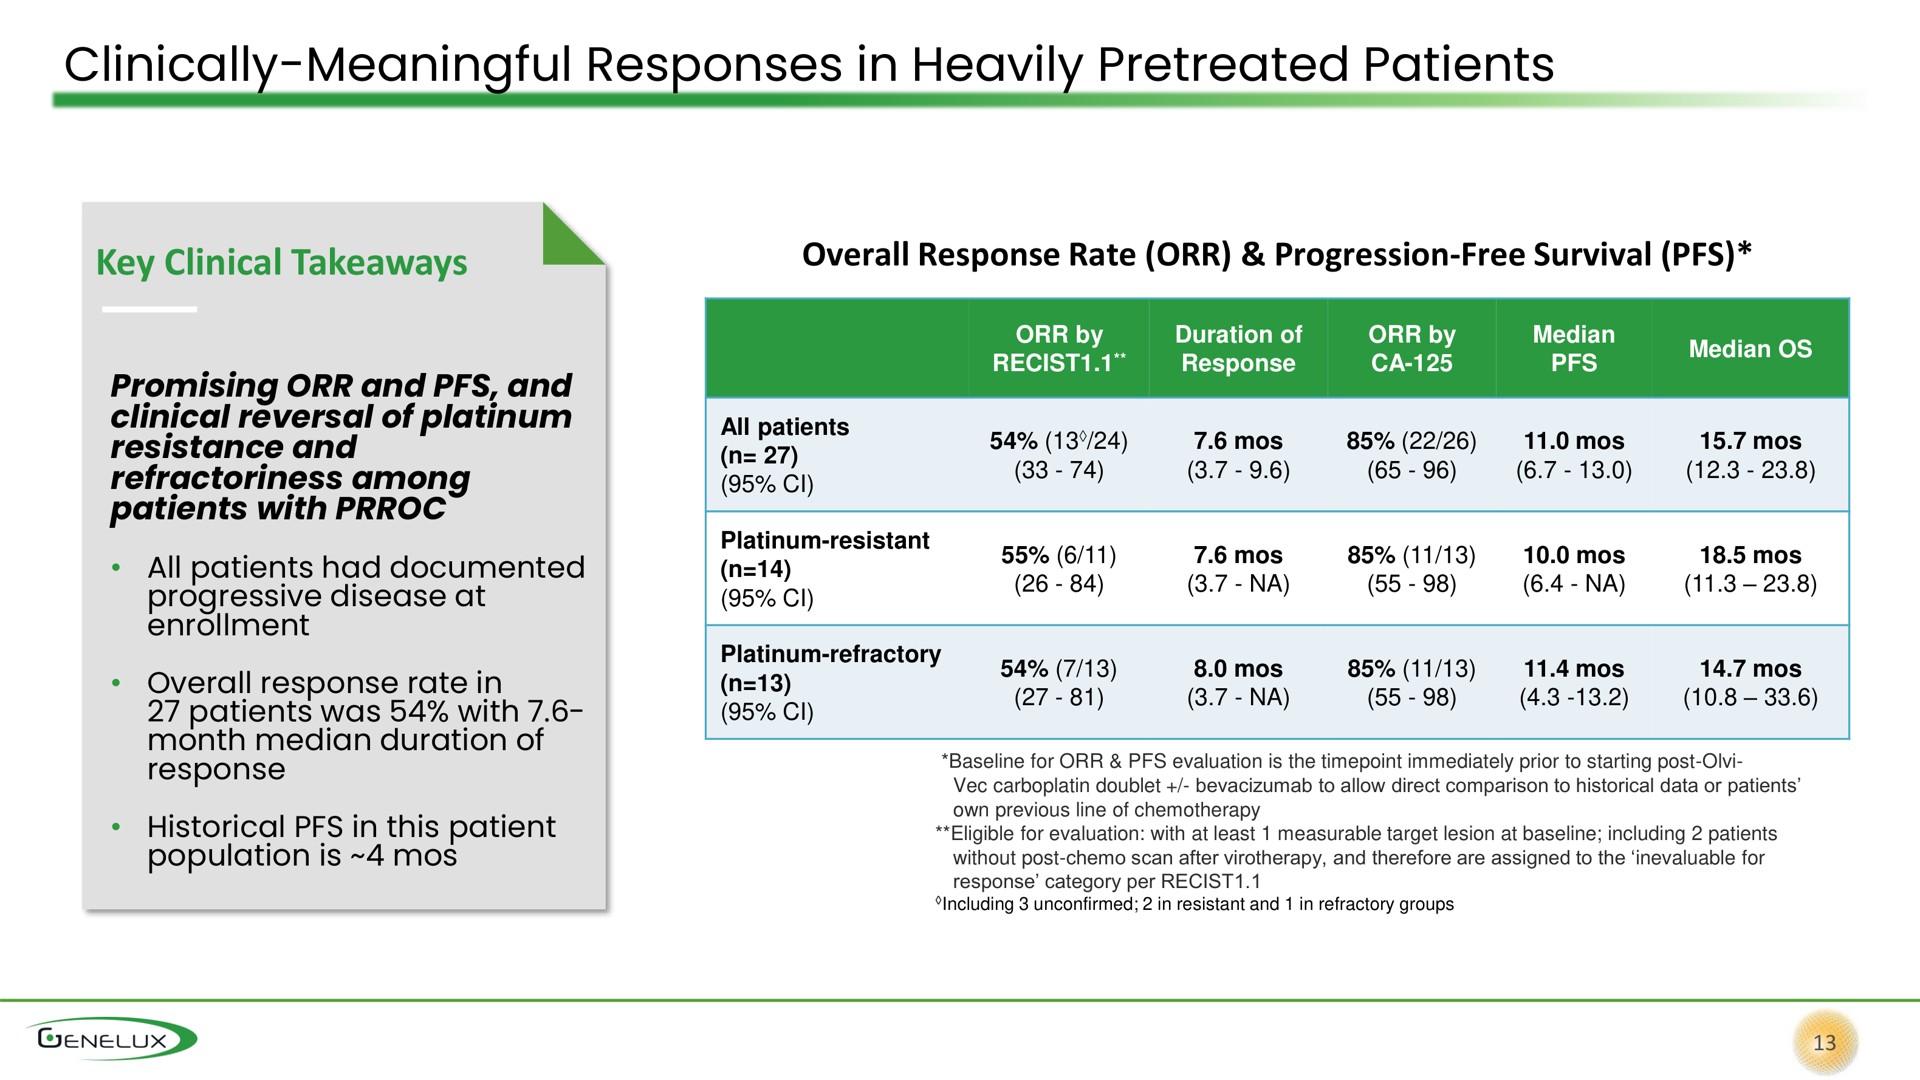 clinically meaningful responses in heavily patients | Genelux